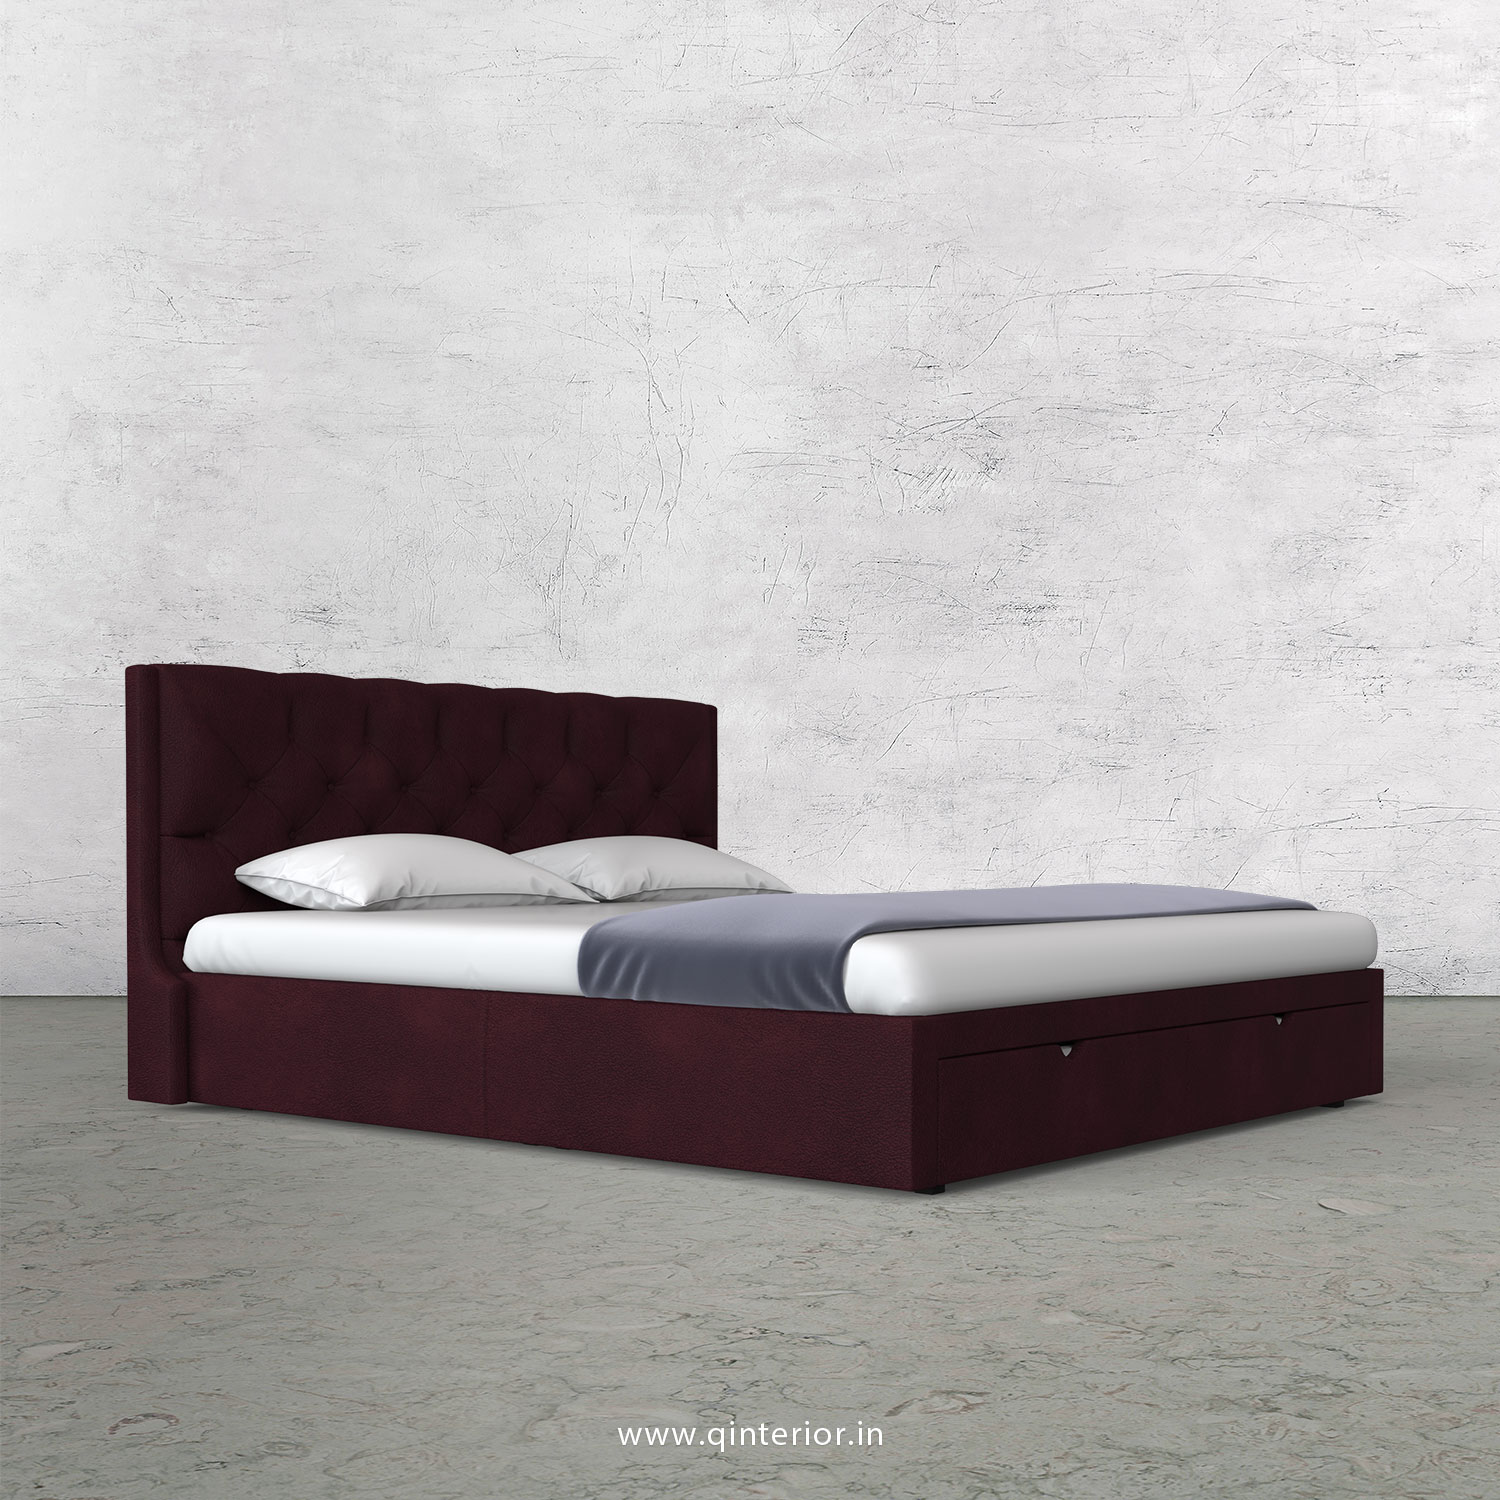 Scorpius Queen Storage Bed in Fab Leather Fabric - QBD001 FL12